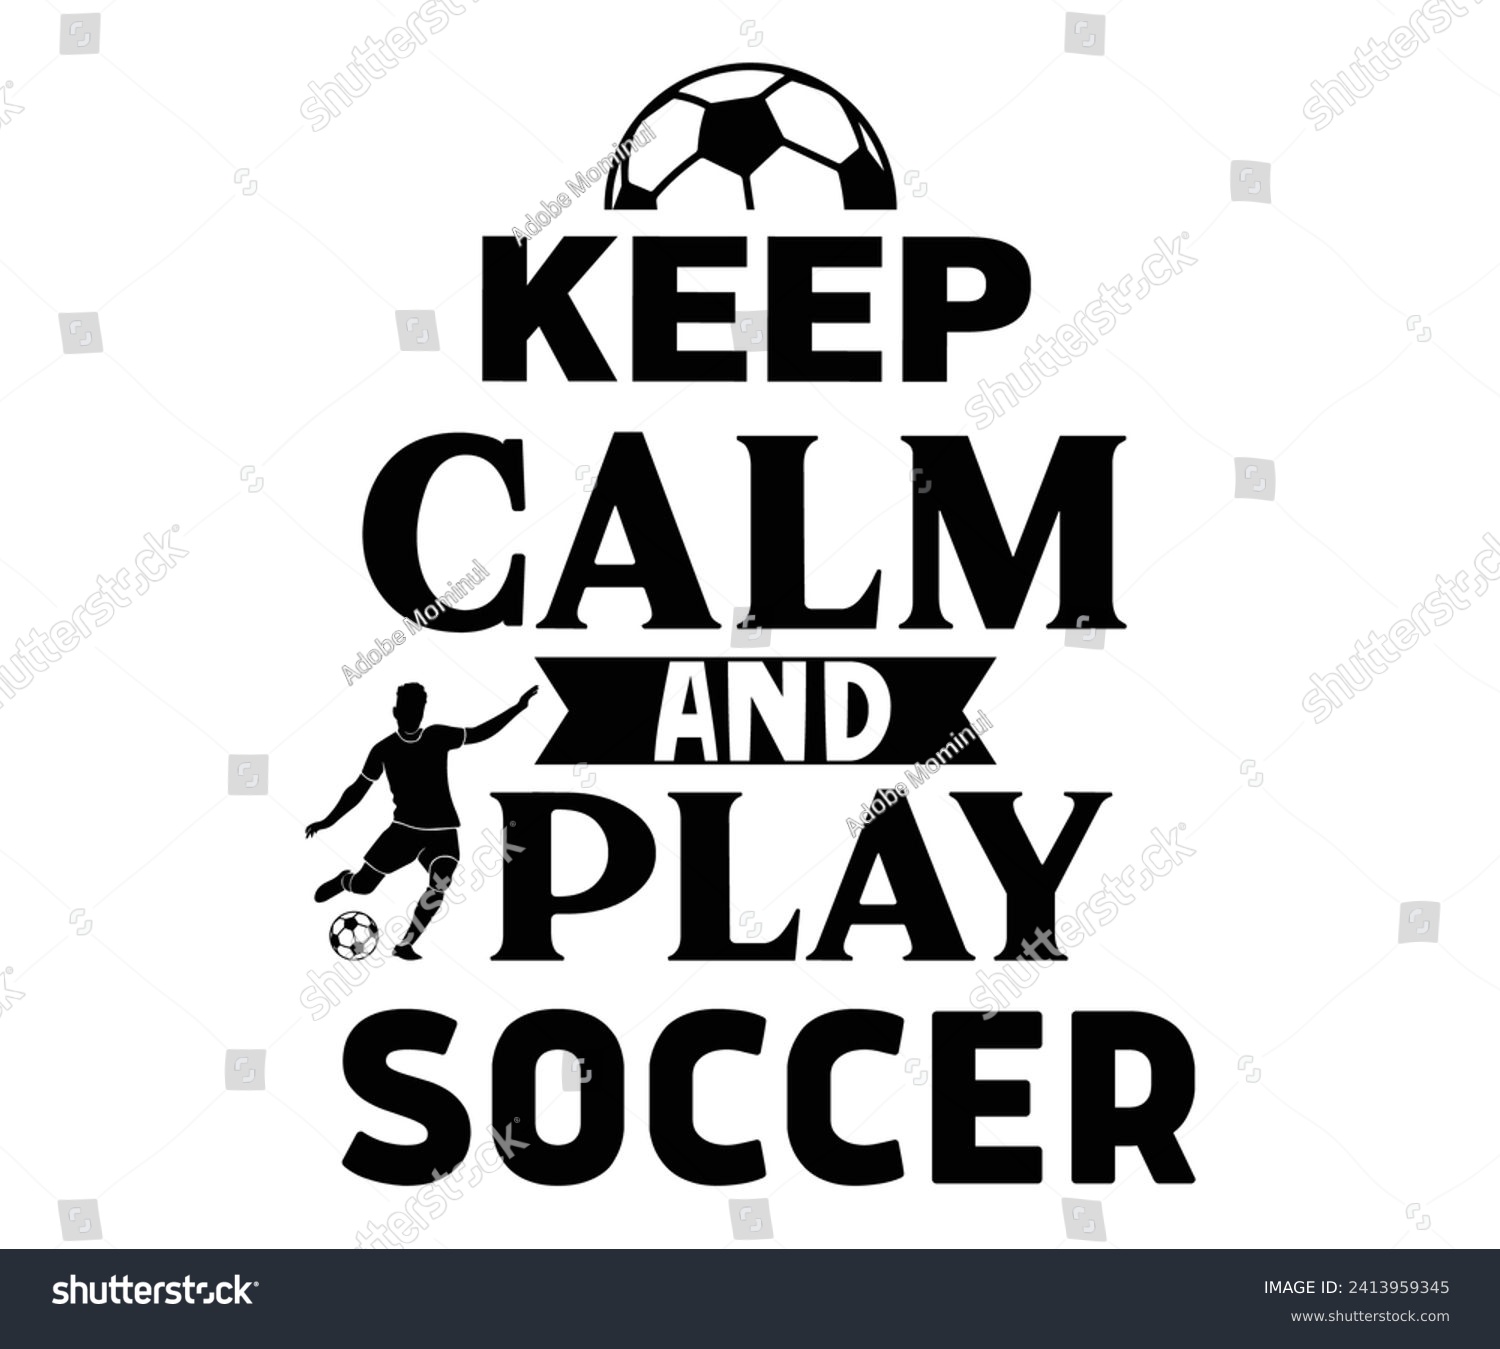 SVG of Keep Calm And Play Soccer Svg,Soccer Svg,Soccer Quote Svg,Retro,Soccer Mom Shirt,Funny Shirt,Soccar Player Shirt,Game Day Shirt,Gift For Soccer,Dad of Soccer,Soccer Mascot,Soccer Football,Sports Day svg